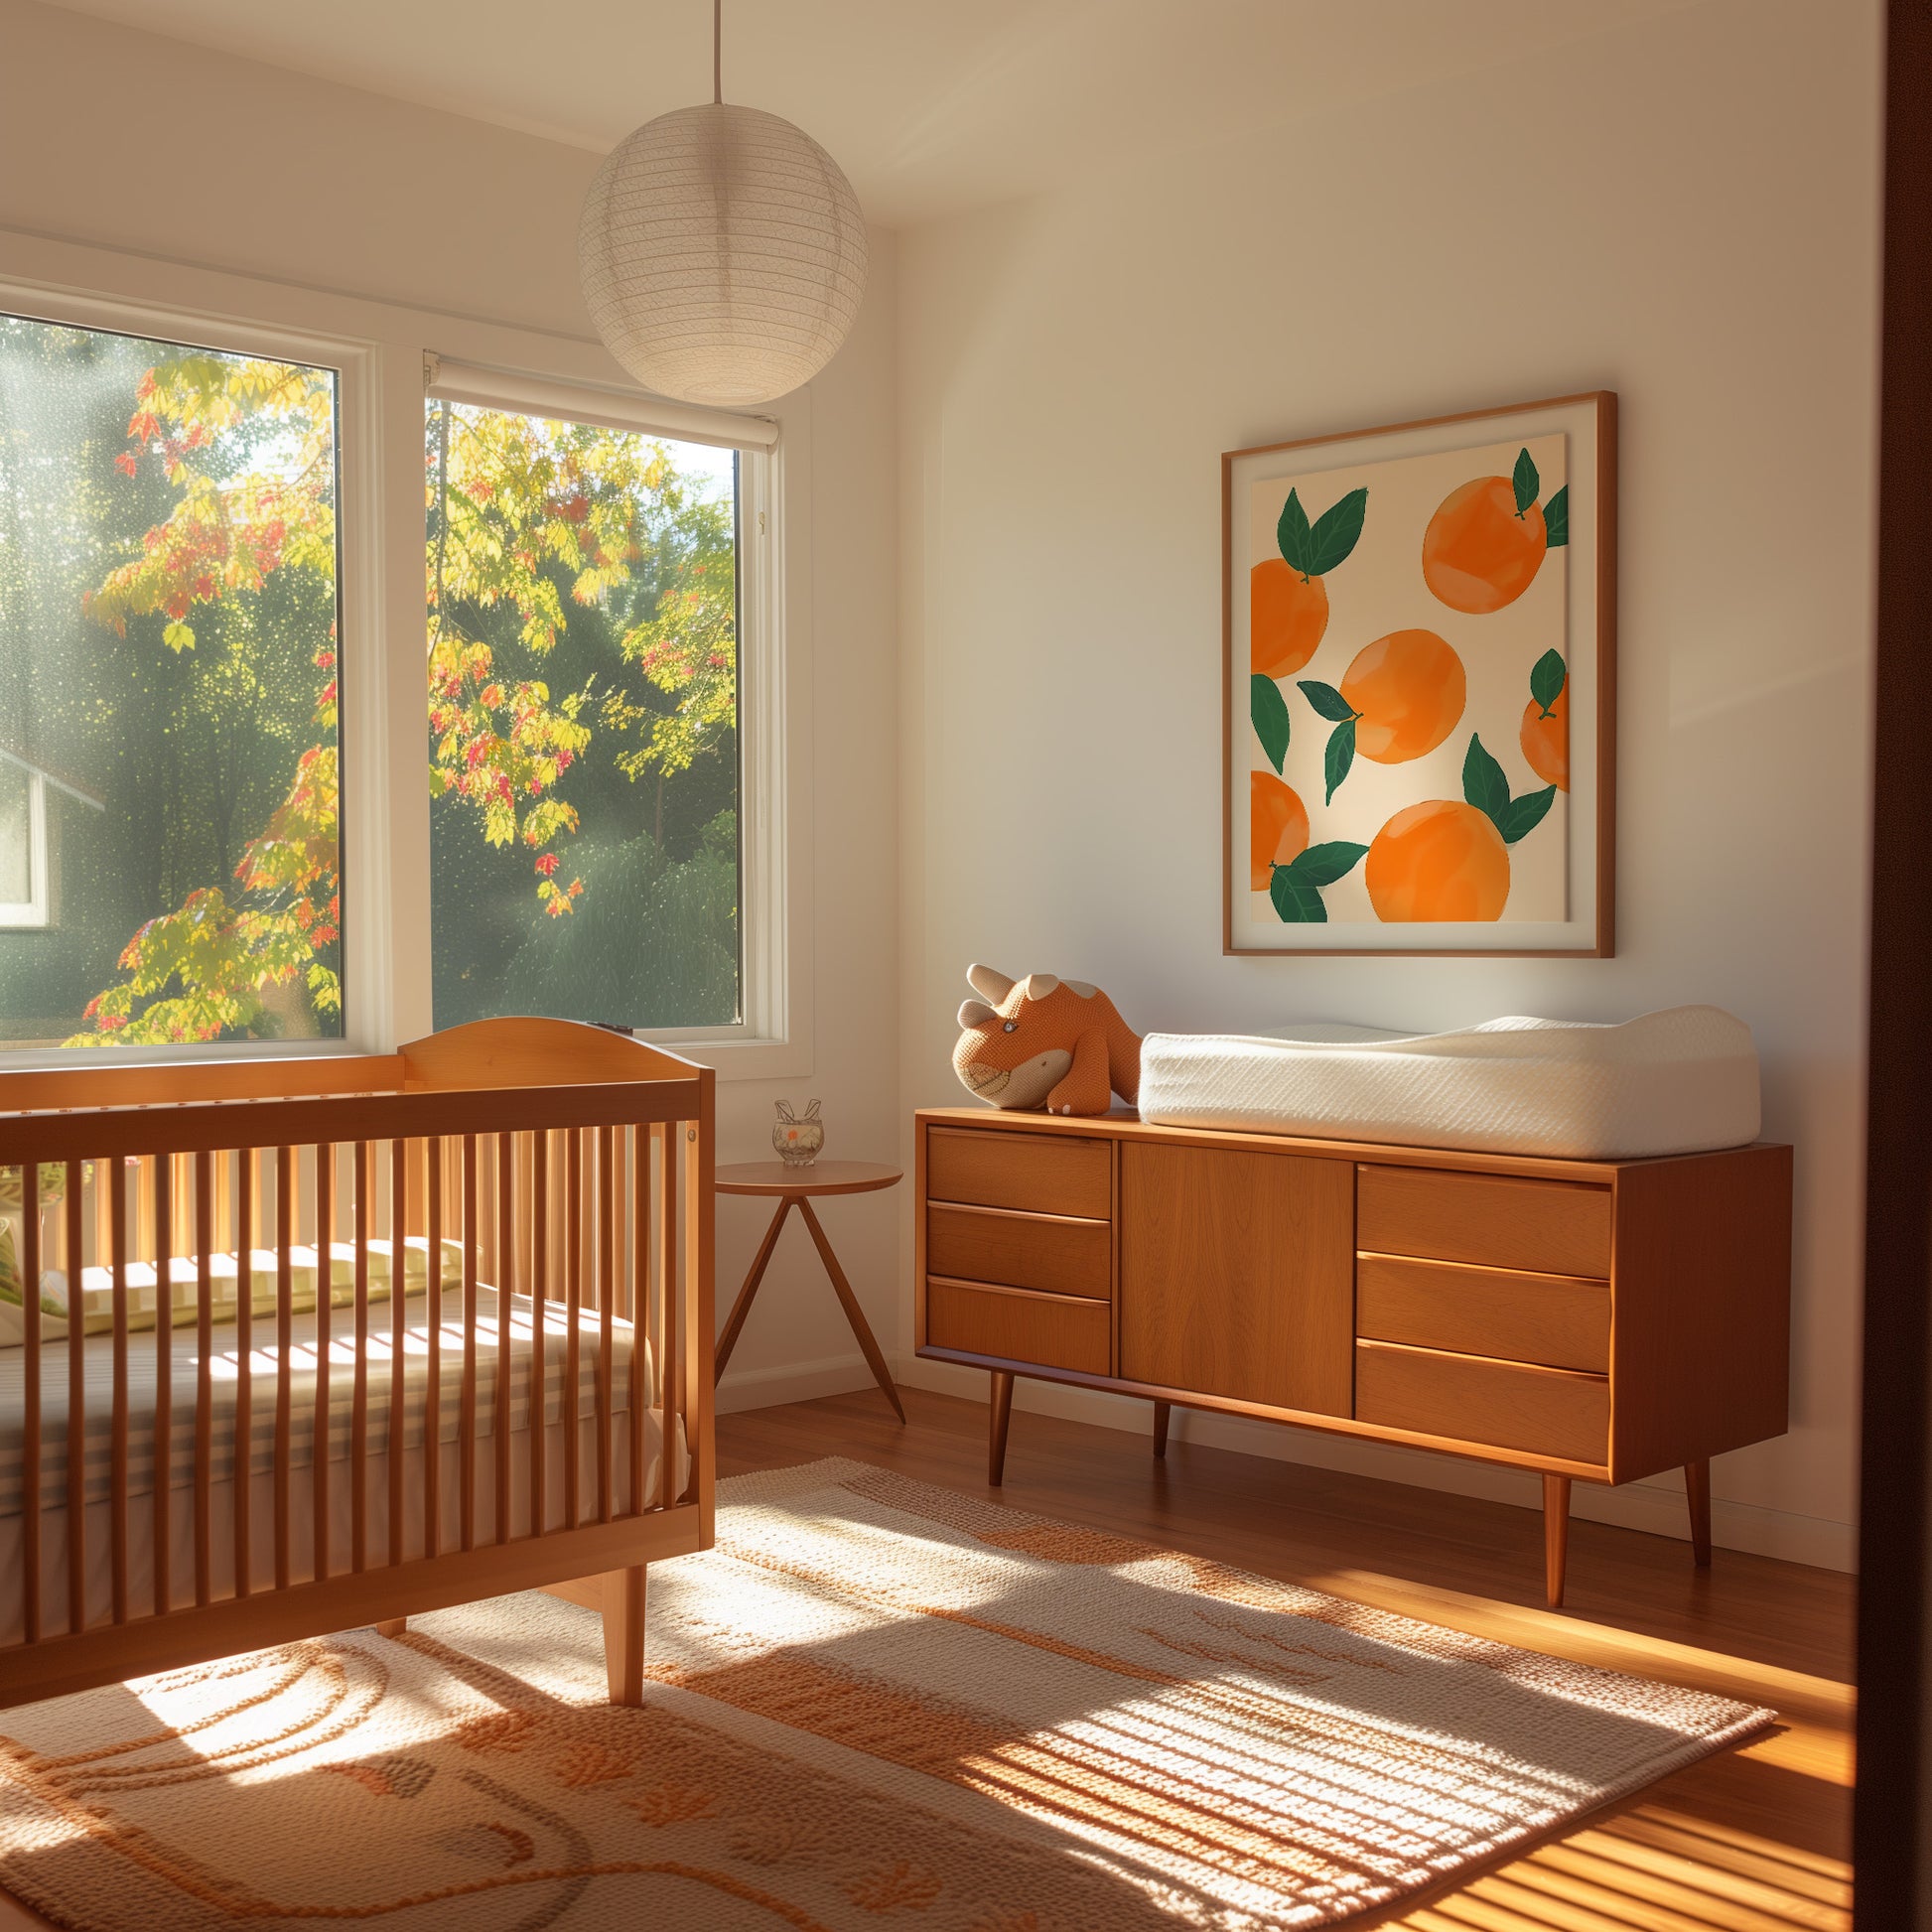 A sunlit nursery with a crib, dresser, and colorful fruit painting on the wall.